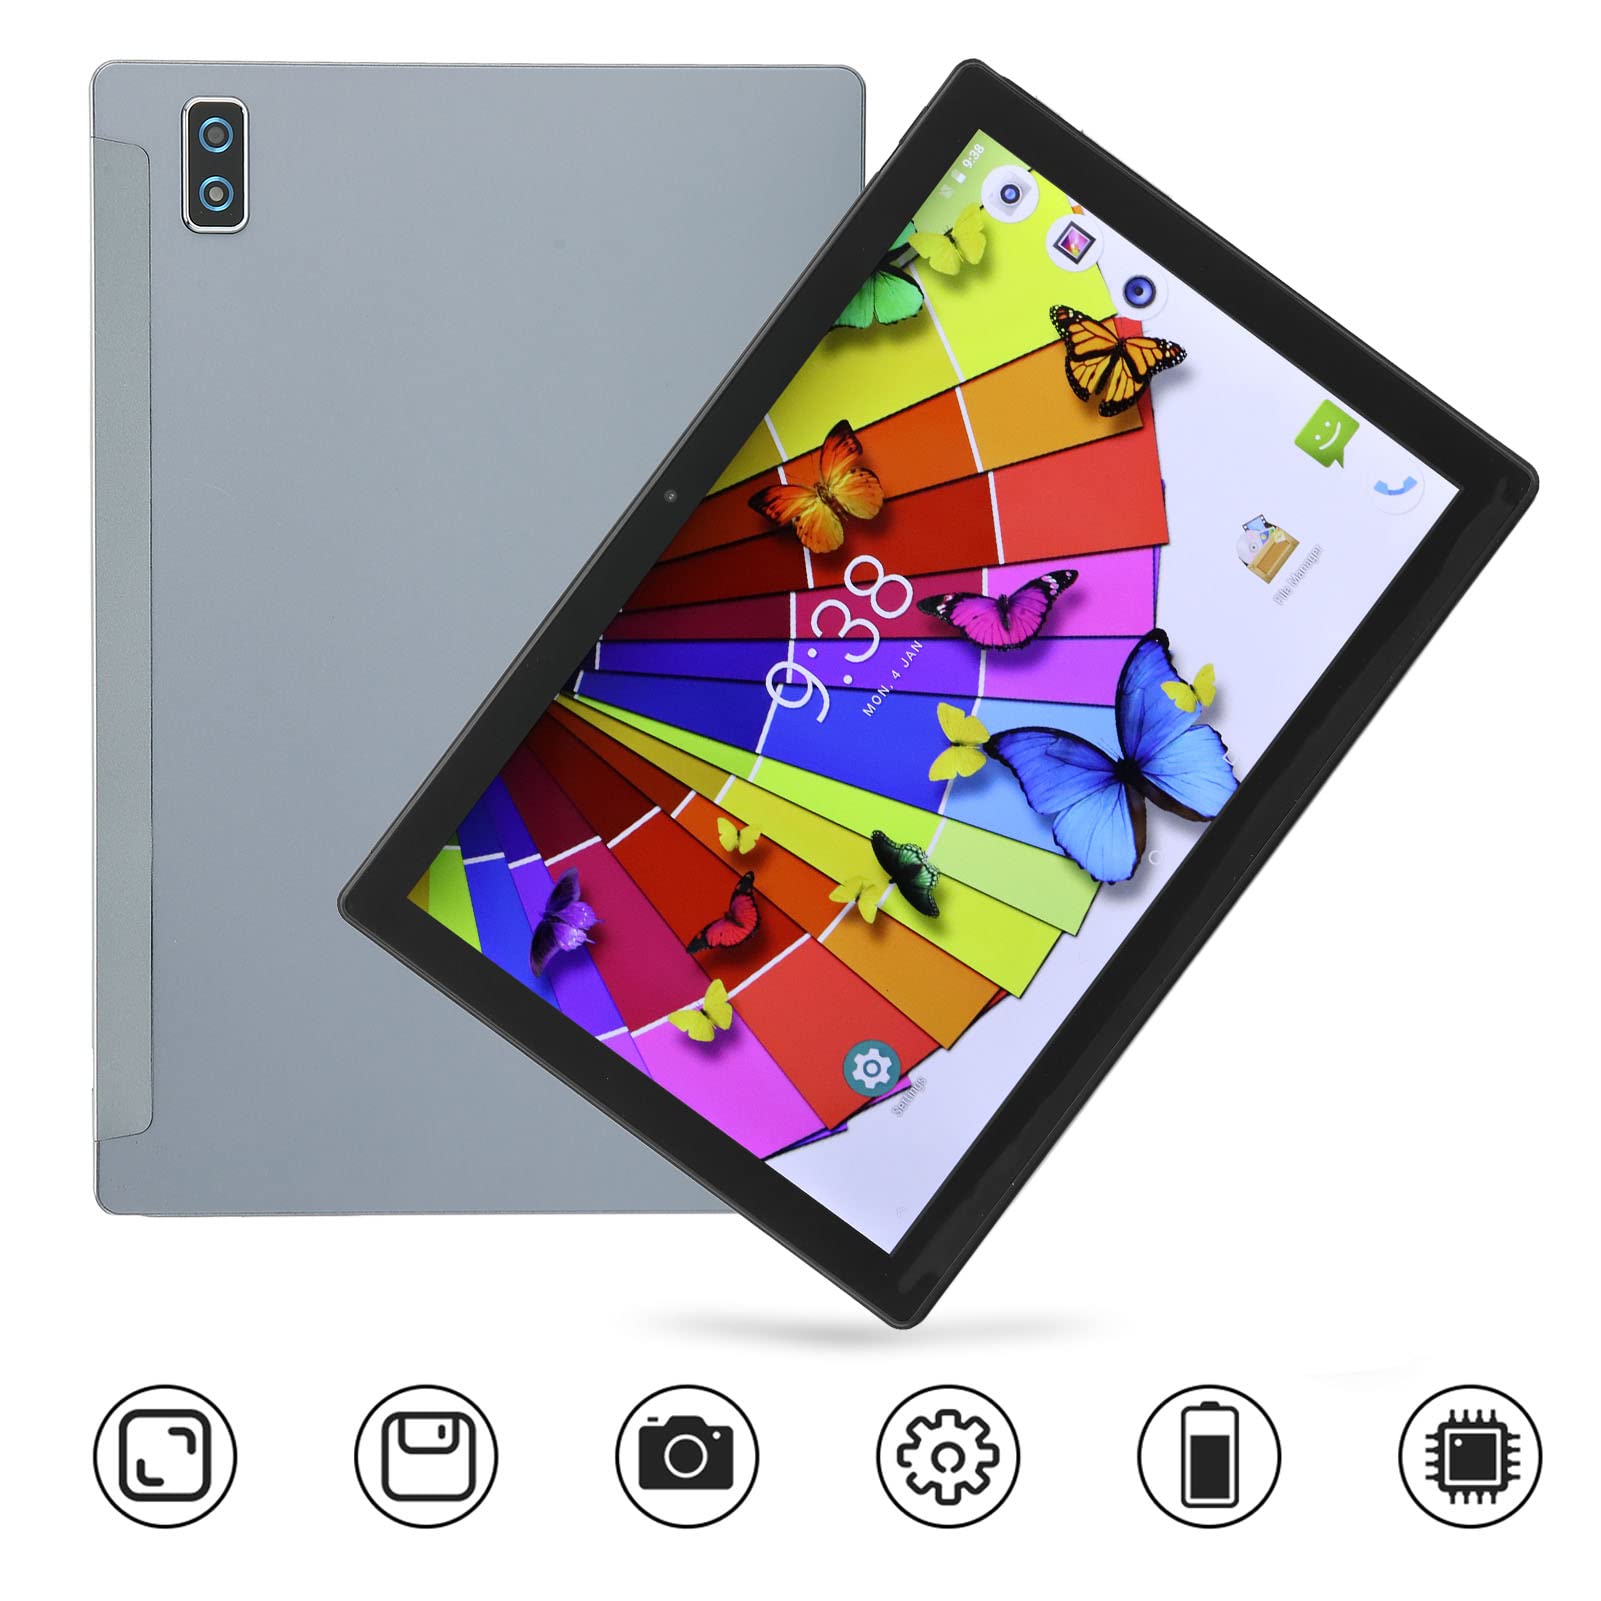 Tablet 10.1 Inch, Android 10 Tablet, Efficient Octa Core Processor, 8GB and 256GB Memory, Dual Card Dual Standby, 8MP Front and 20MP Rear, 128GB Expand Support for Learning, Watch Videos(USA)